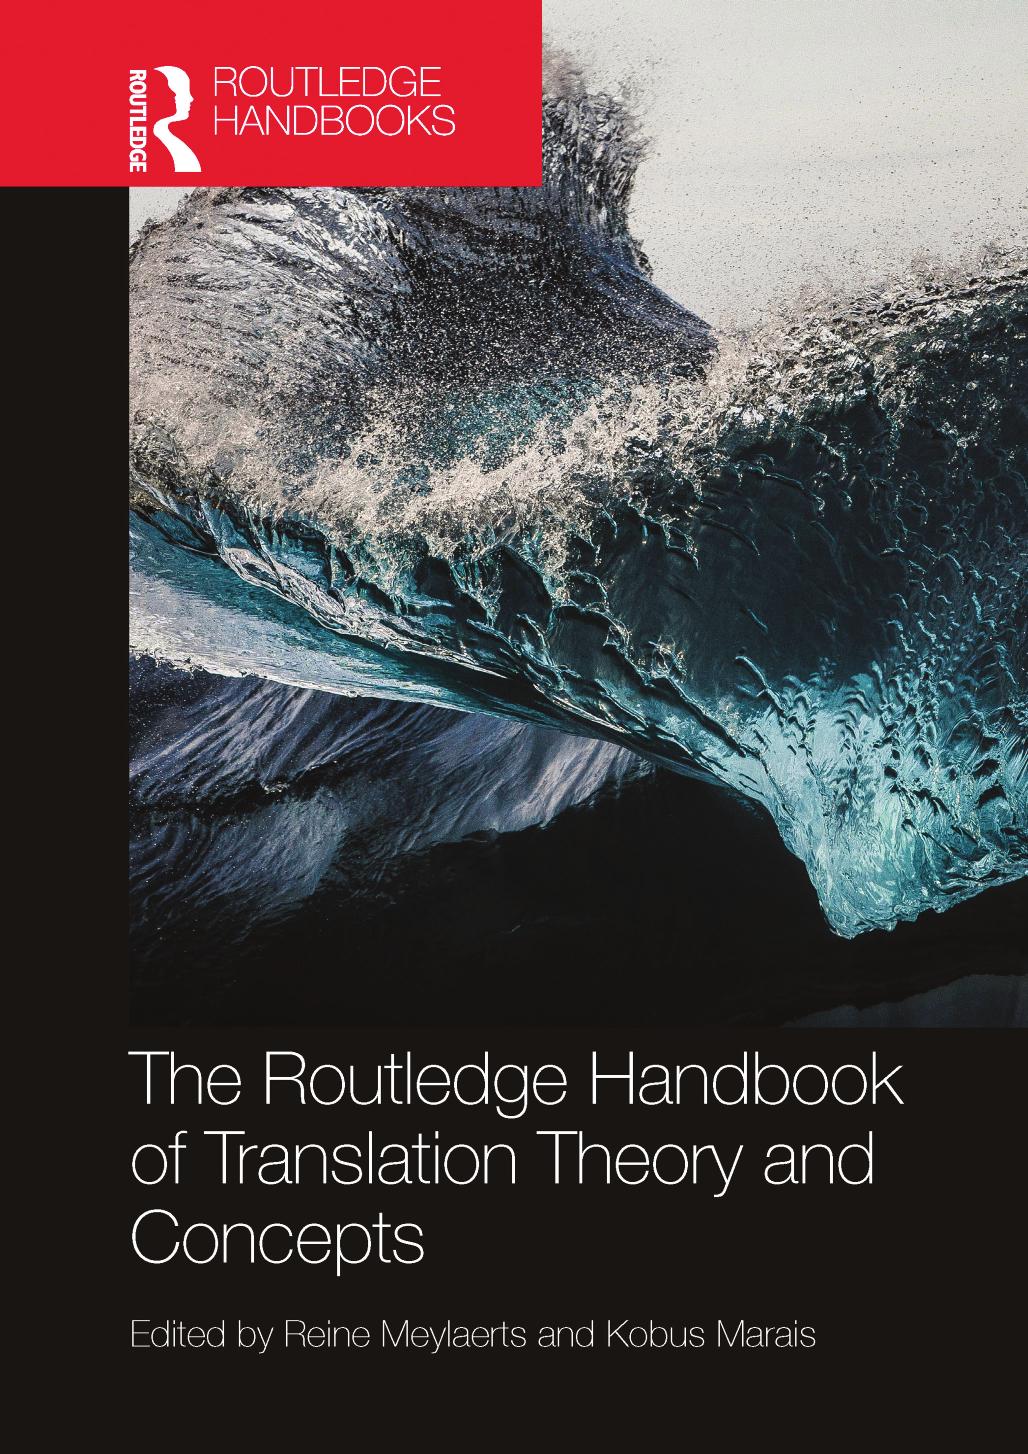 The Routledge Handbook of Translation Theory and Concepts by Reine Meylaerts Kobus Marais